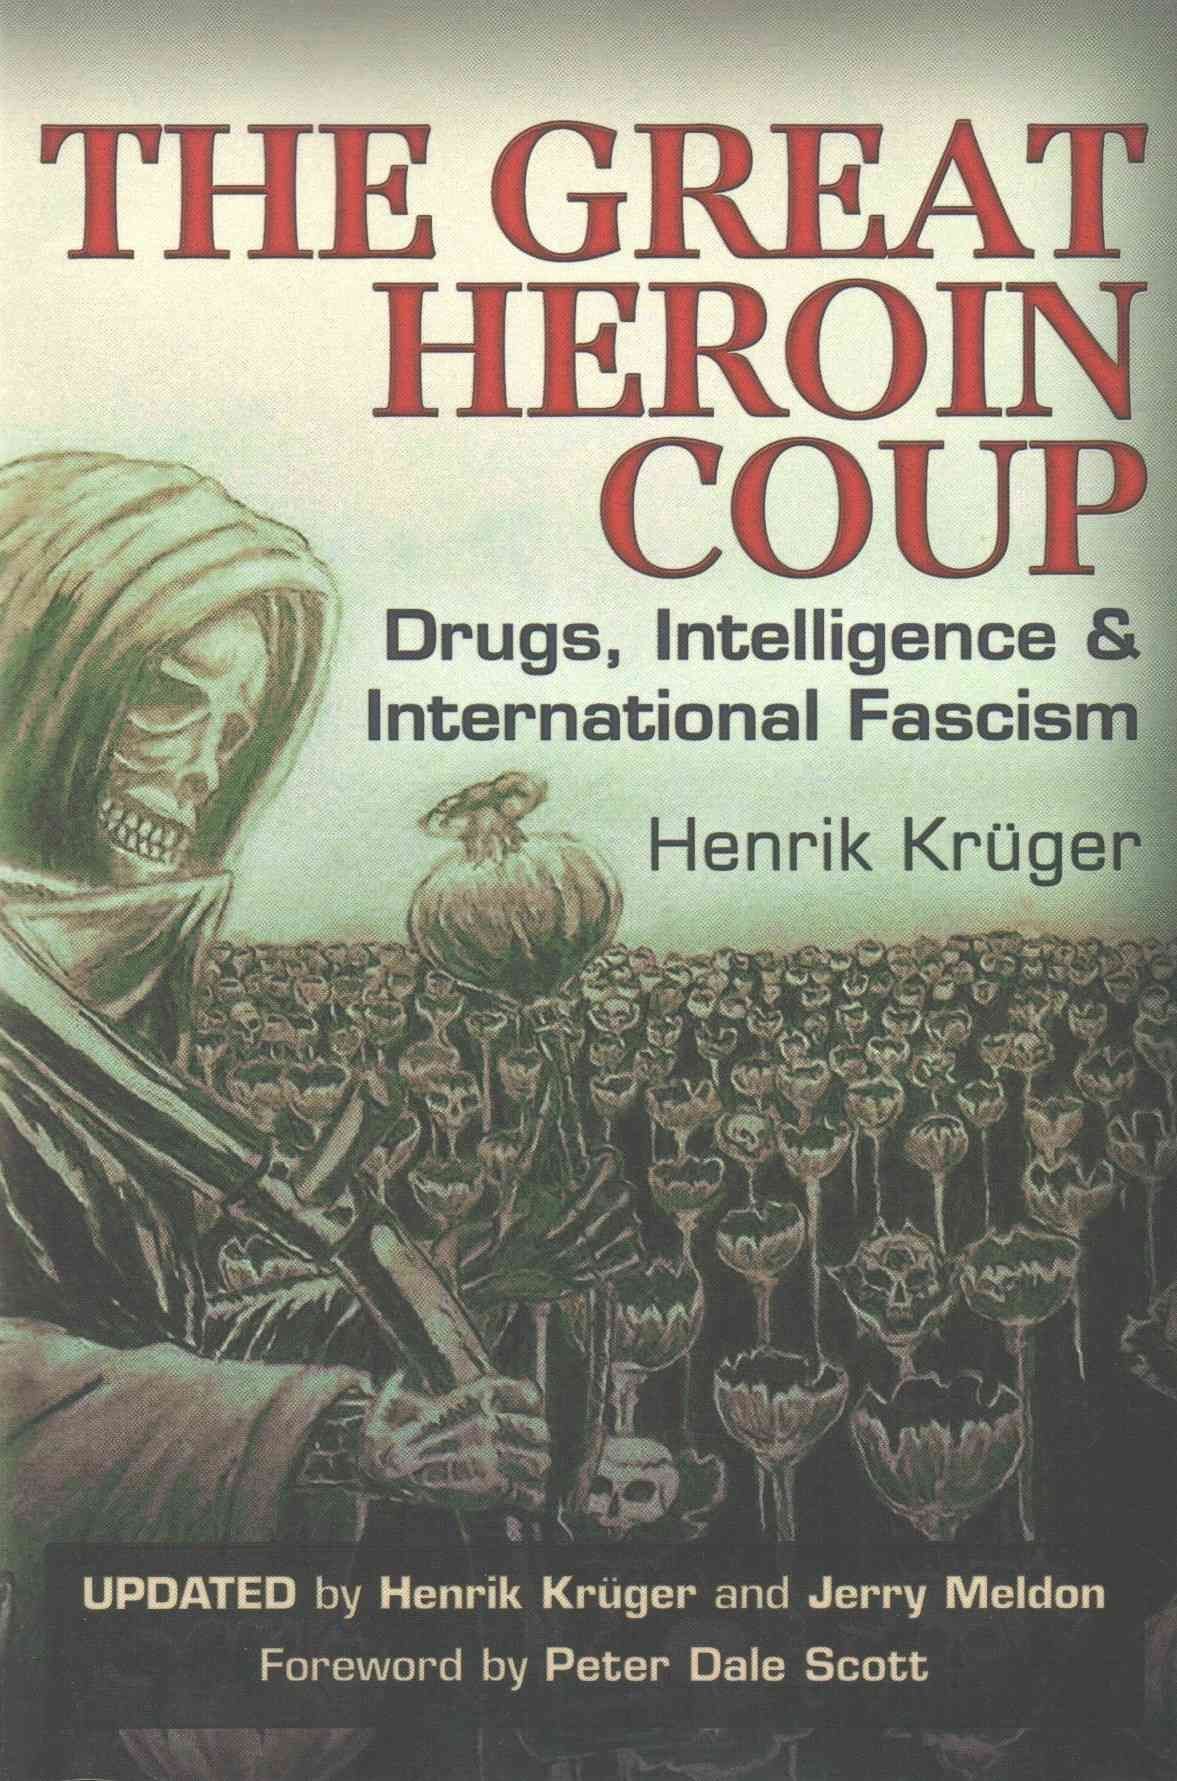 The Great Heroin Coup